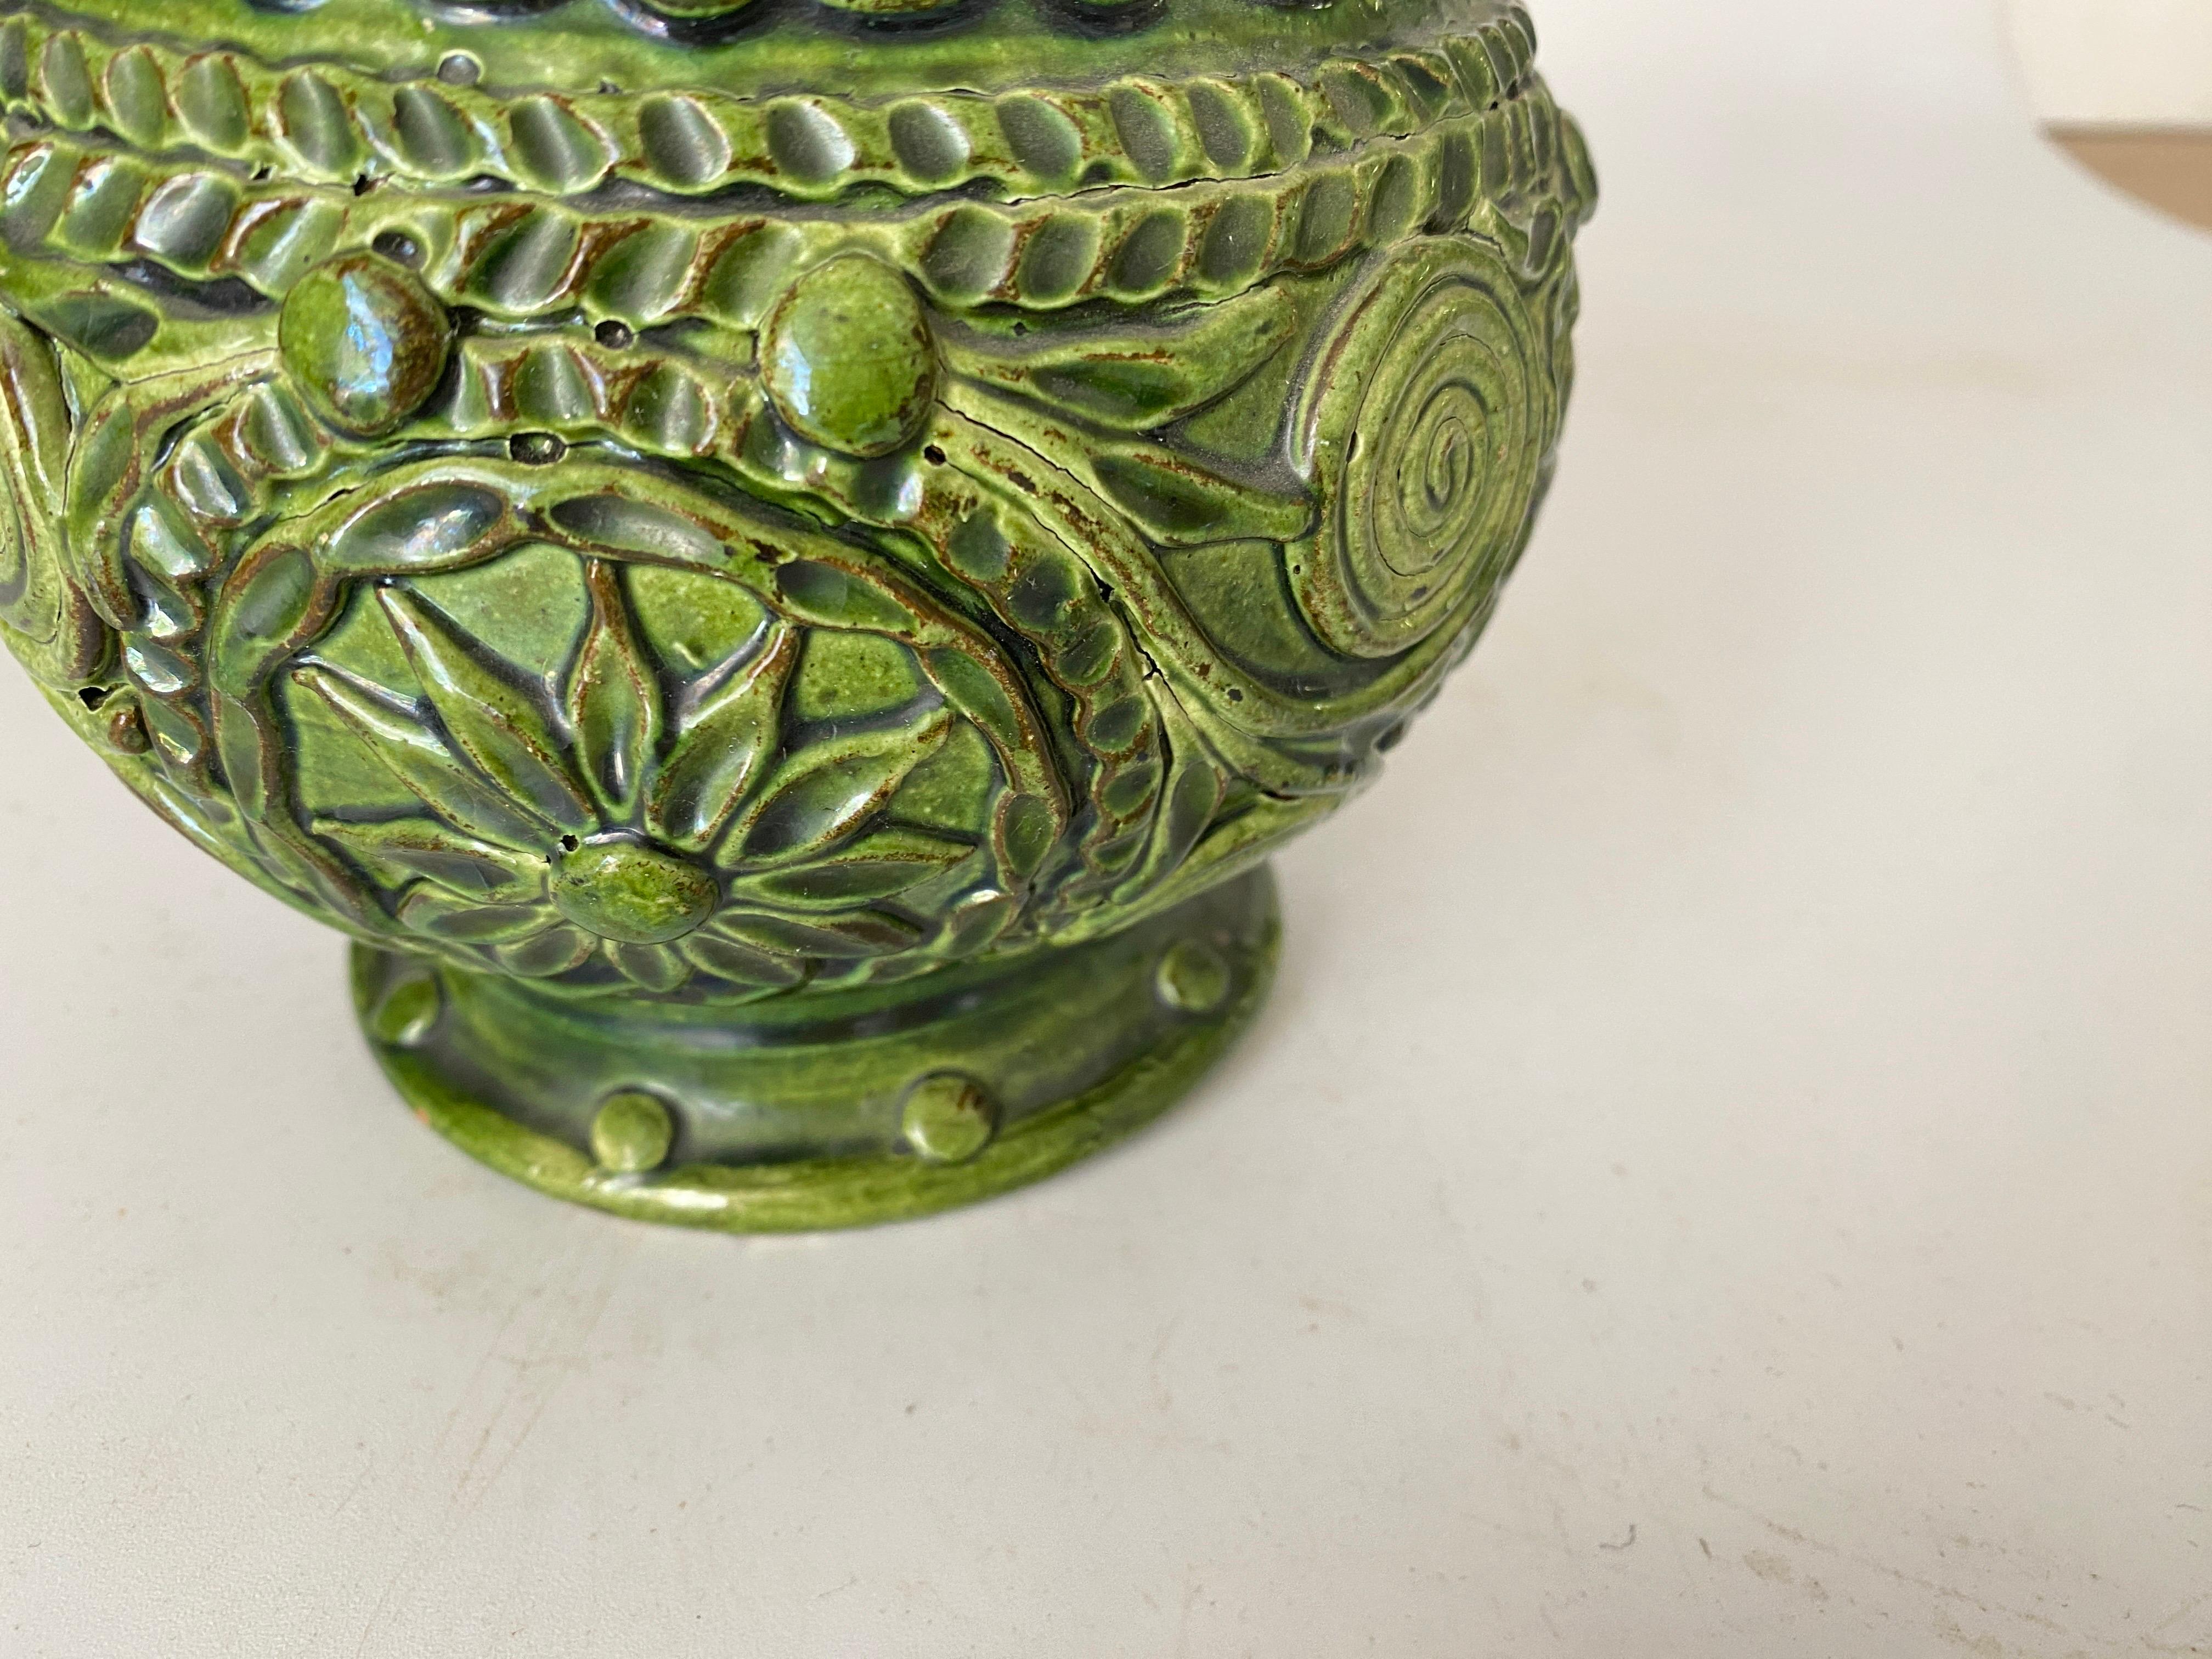  Pot or Box 19th Century Majolica France Ceramic Green with an Circular Handle For Sale 3